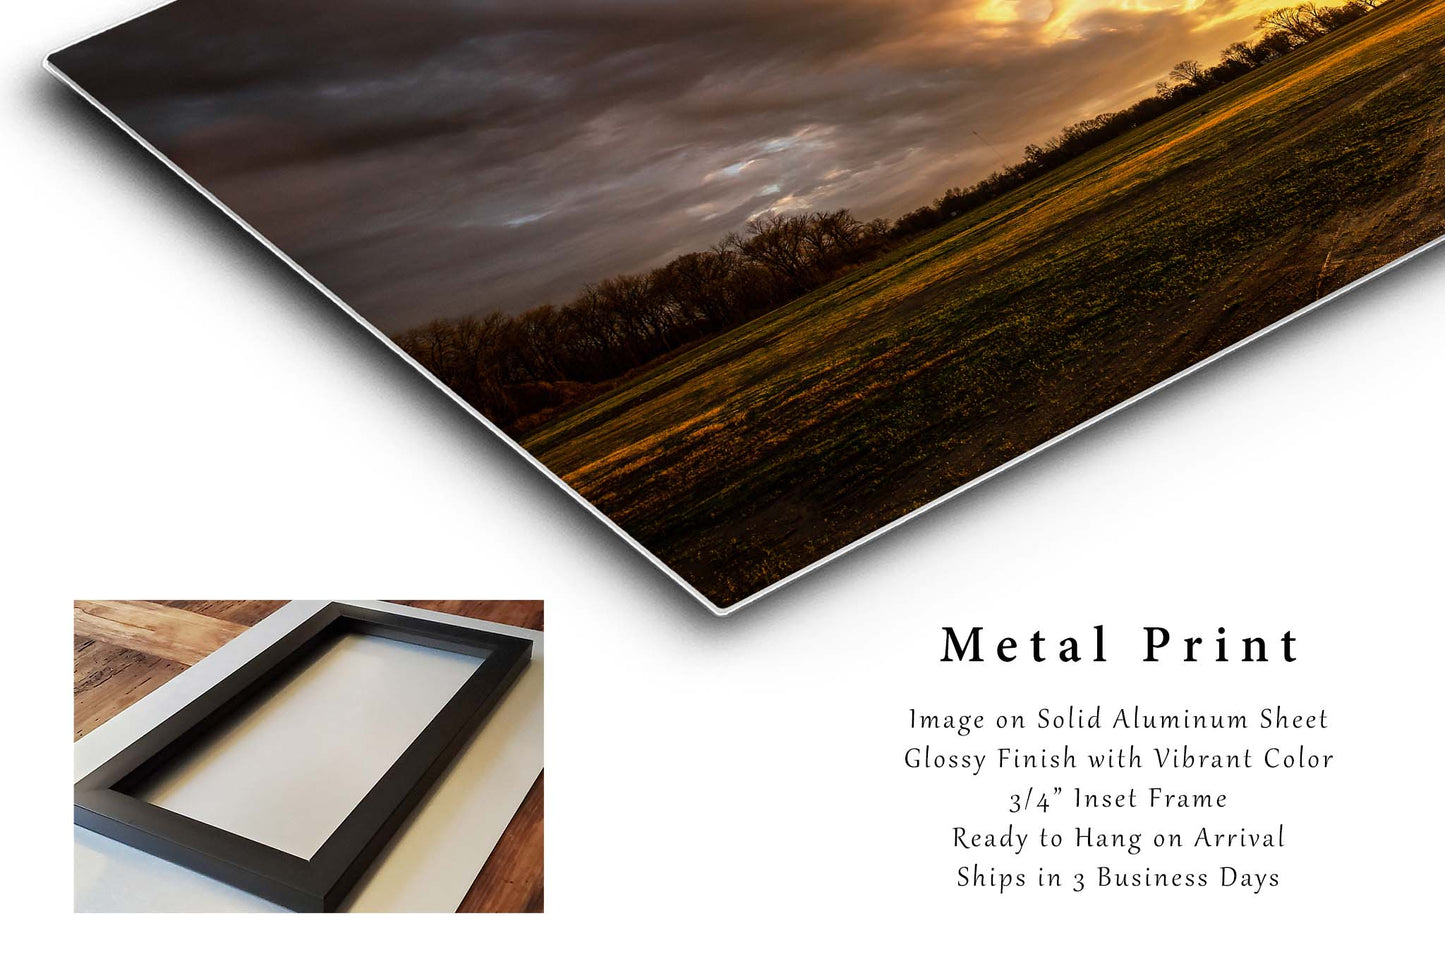 Southeastern Metal Print (Ready to Hang) Photo of Warm Sunset Over Farm in Mississippi Delta Mississippi Country Photography Southern Decor